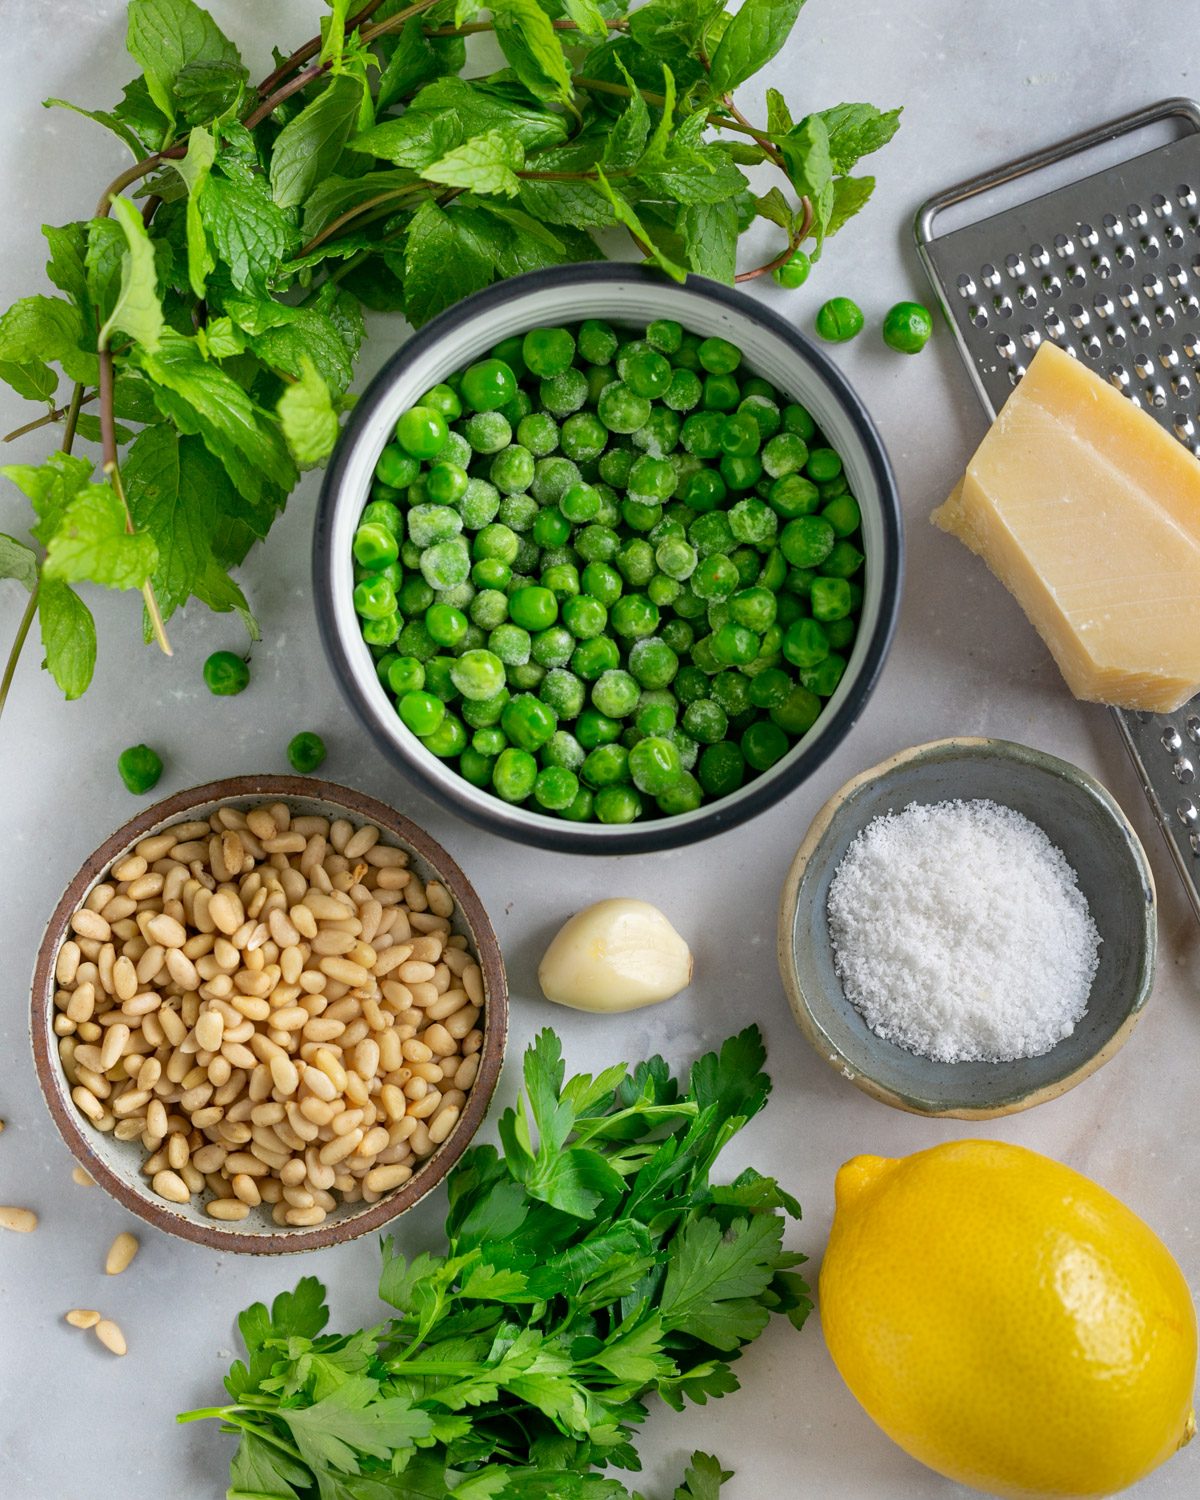 Ingredients to make Pea Mint Pest